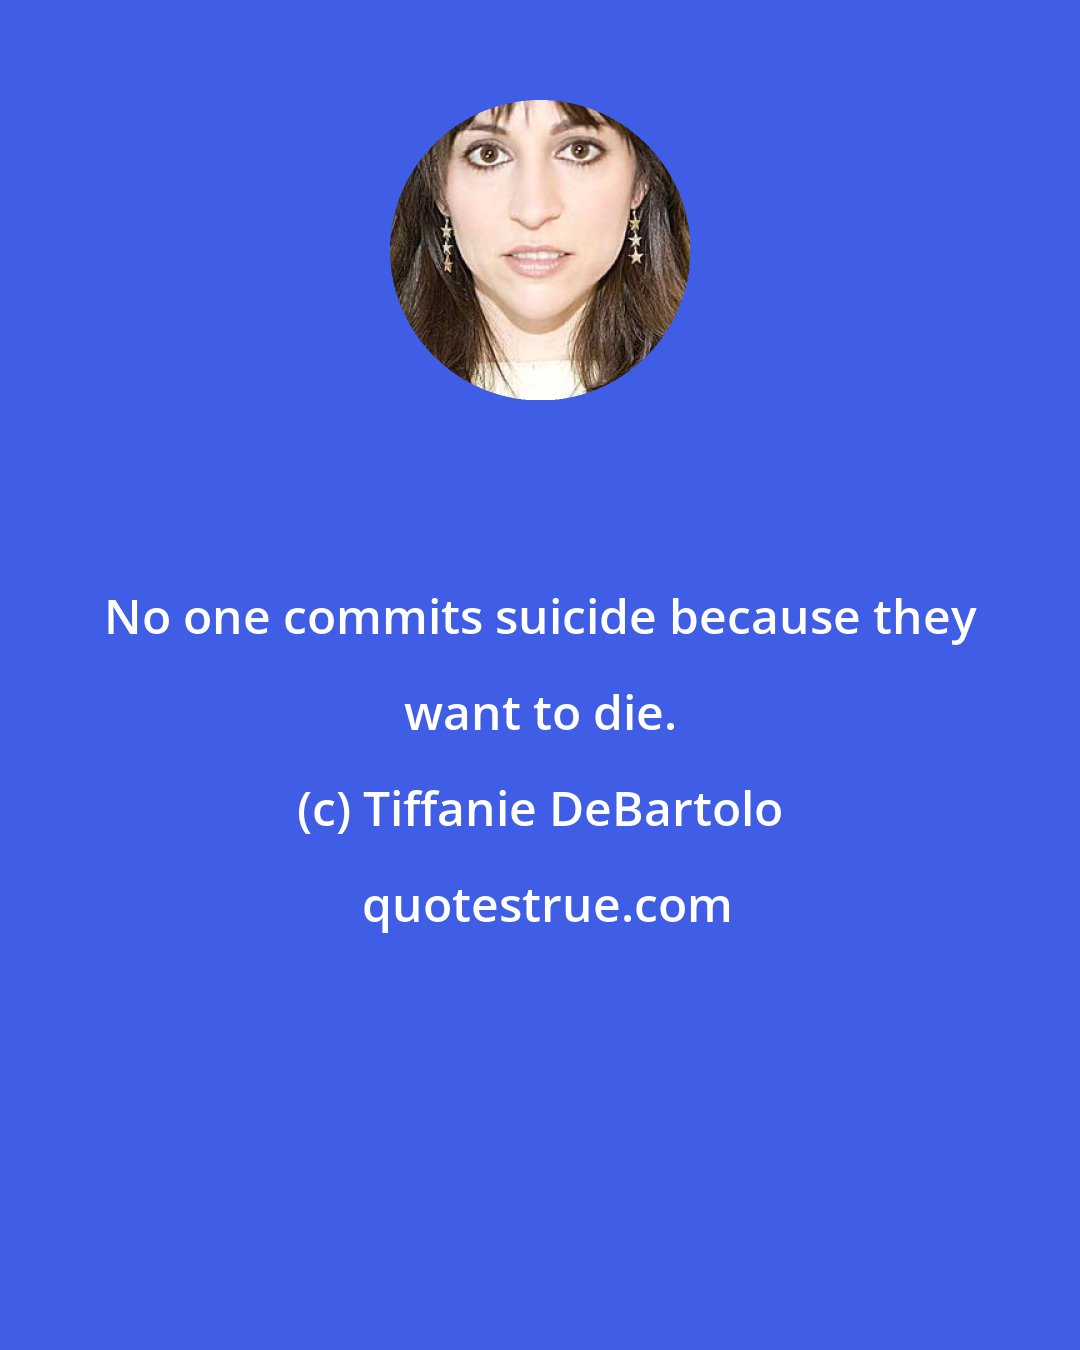 Tiffanie DeBartolo: No one commits suicide because they want to die.